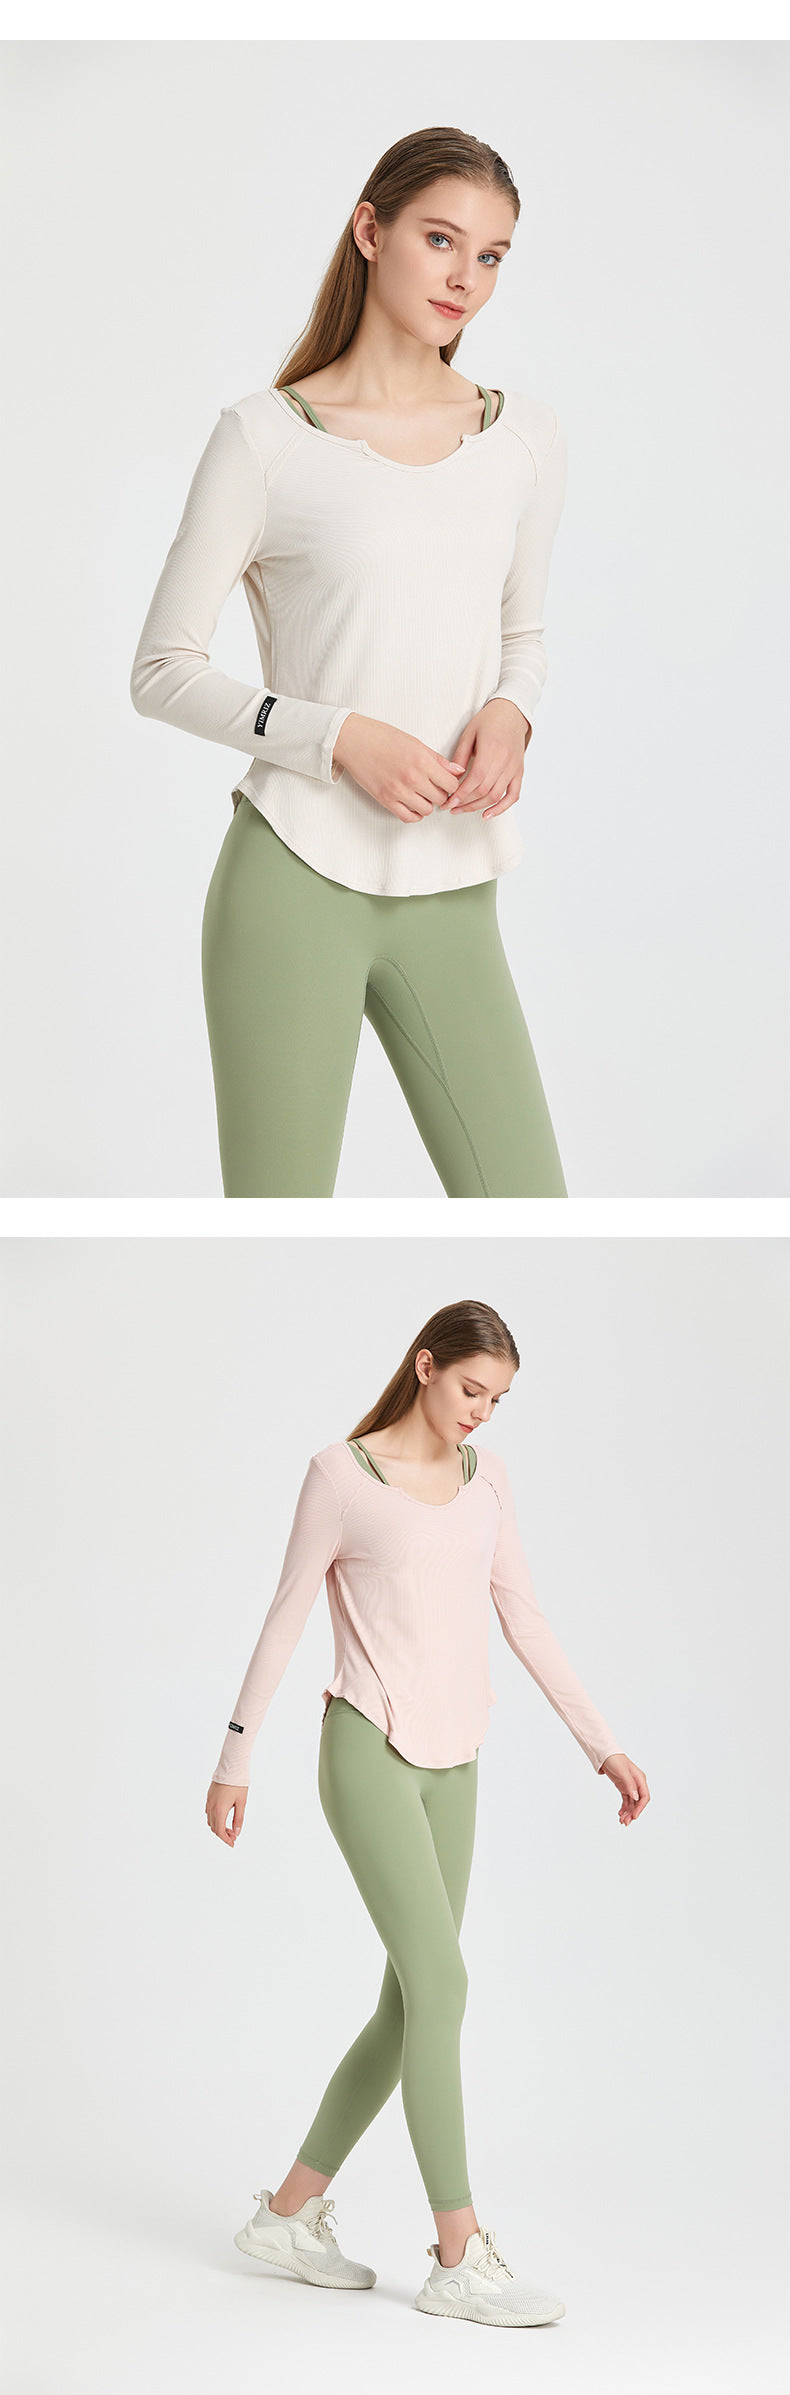 v-neck ribbed slim fit yoga cloribbed thing top women's cross-border casual running sports fitness clothing long-sleeved t-shirt